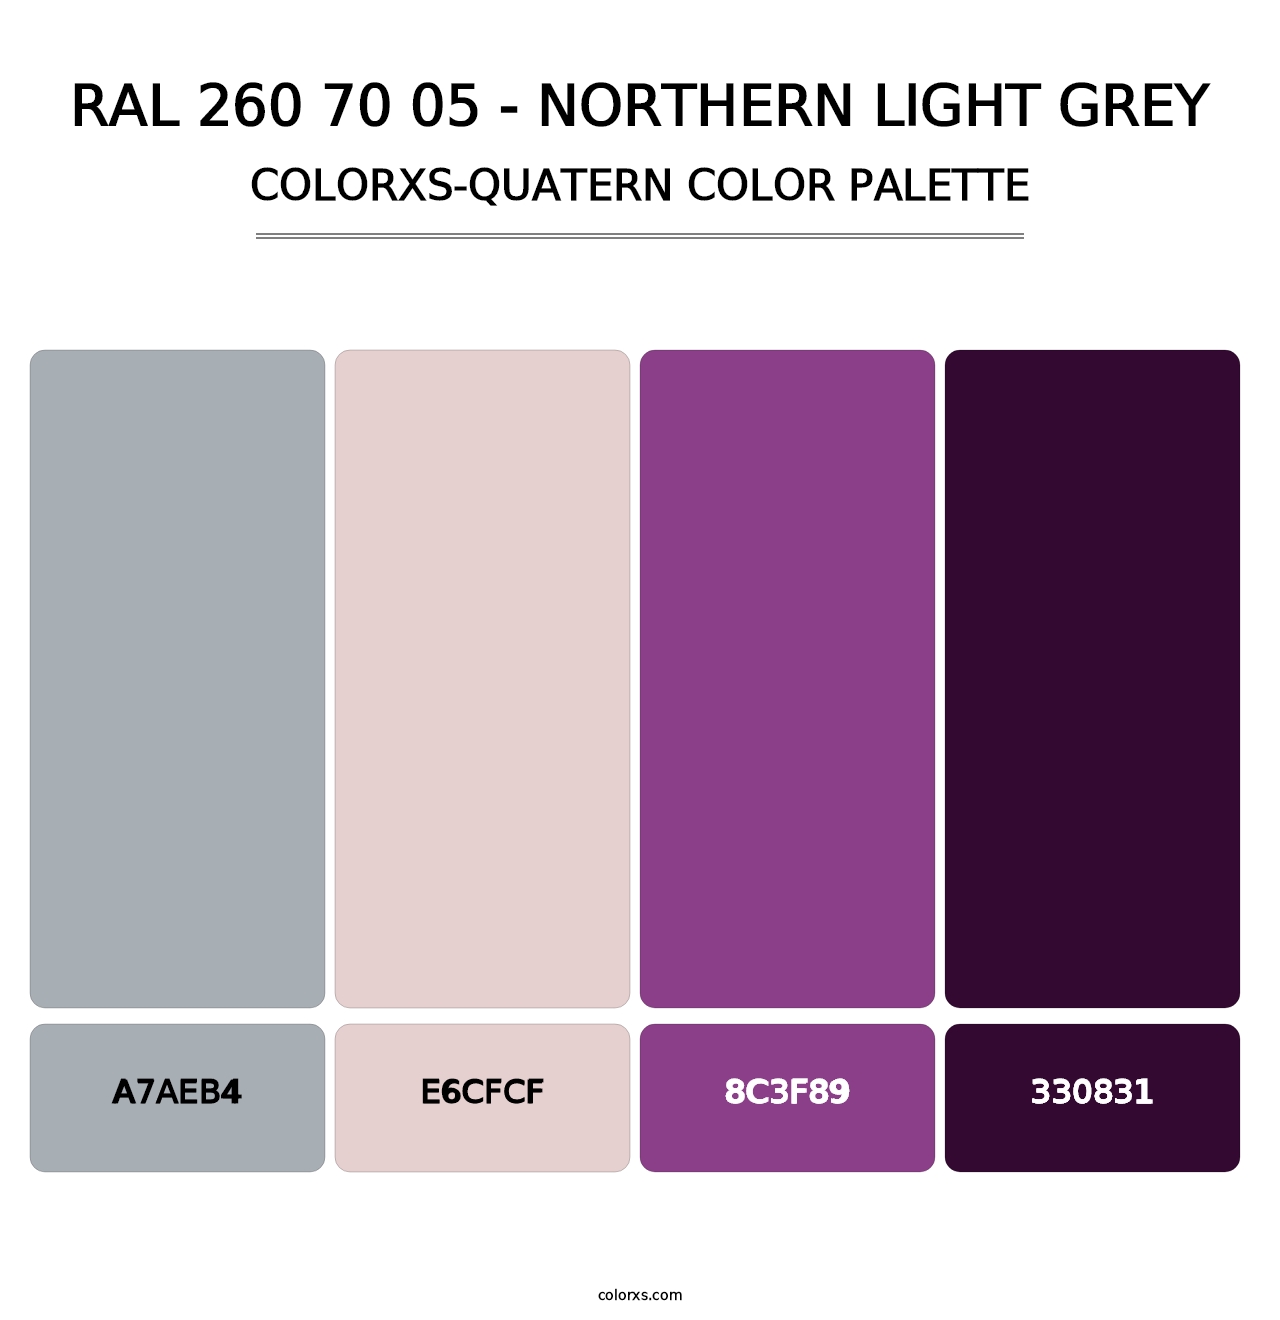 RAL 260 70 05 - Northern Light Grey - Colorxs Quatern Palette